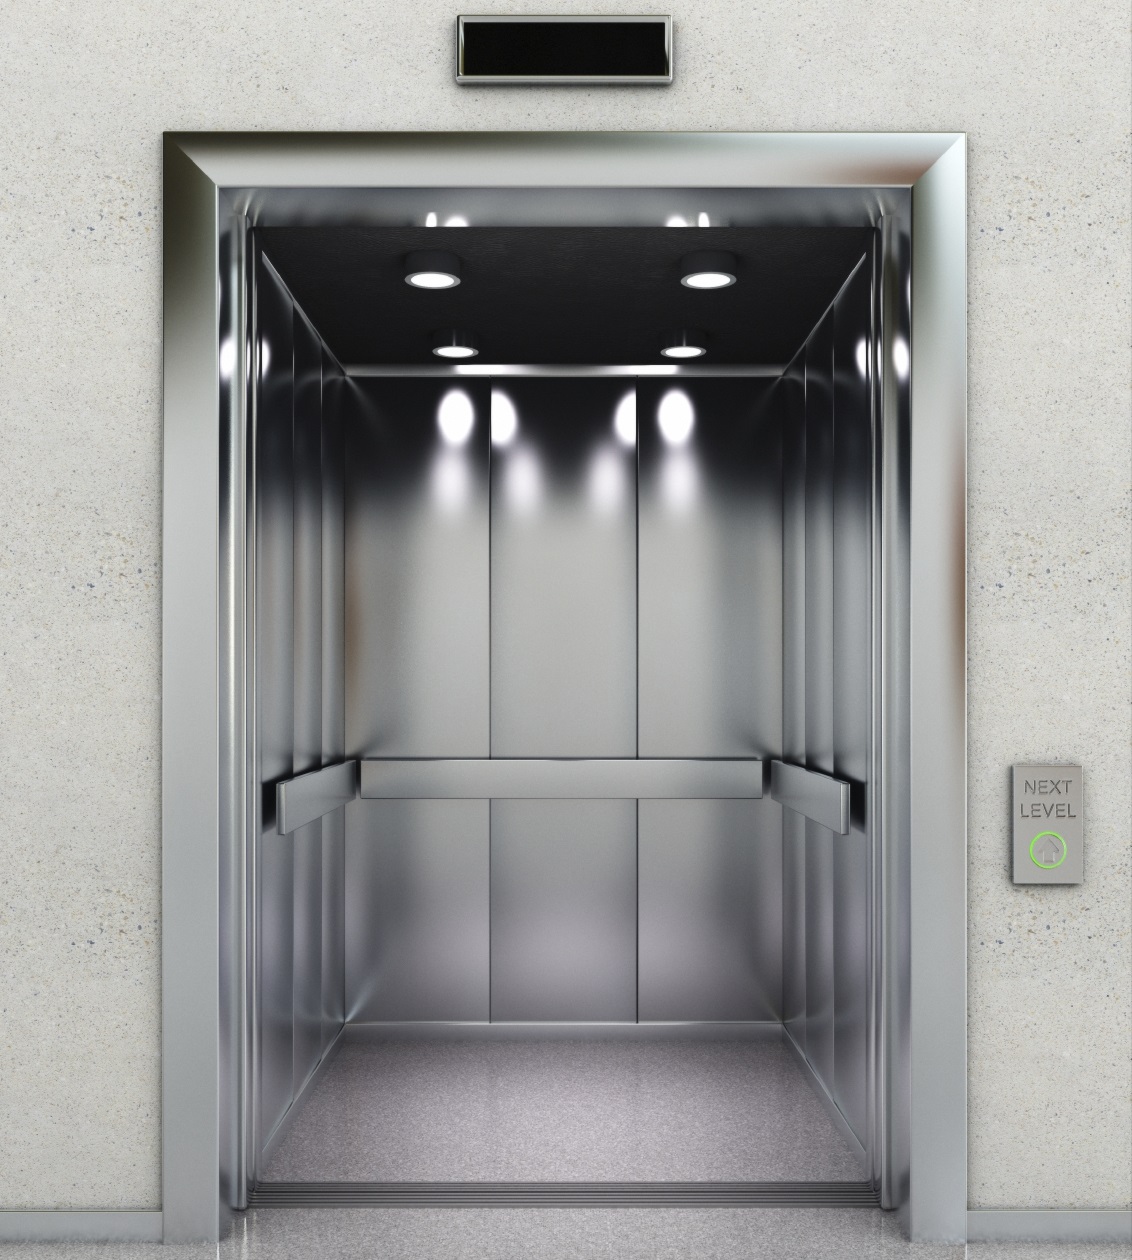 Types of Lifts - Designing Buildings